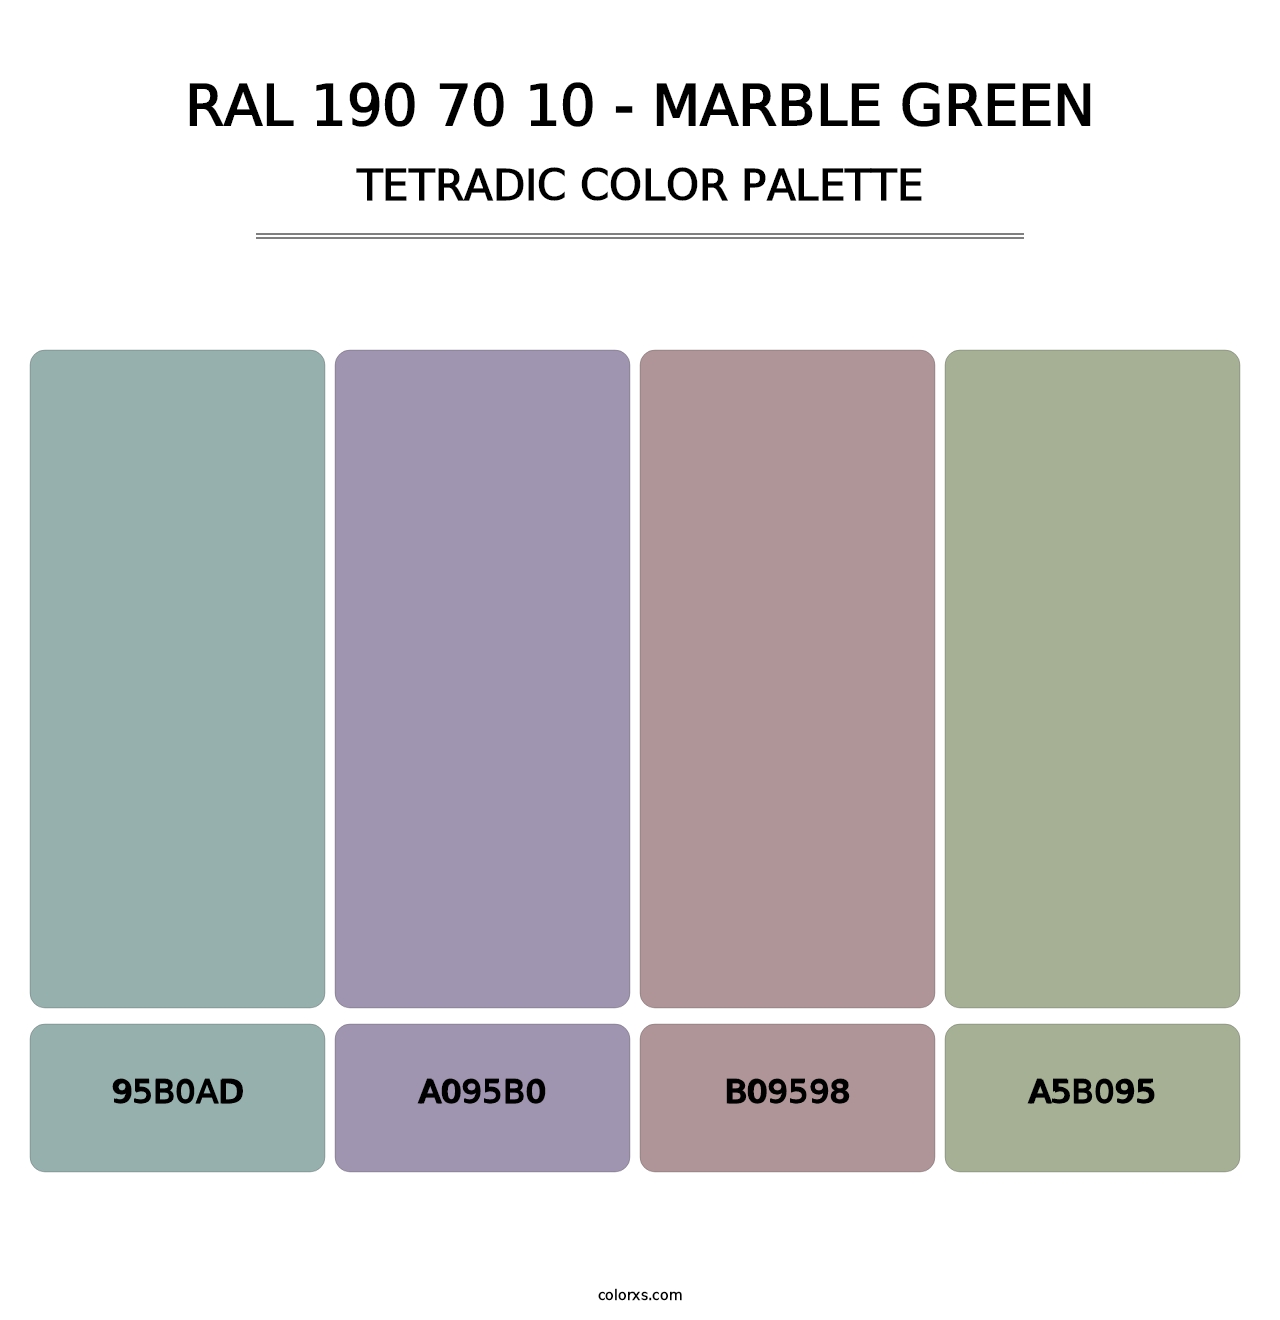 RAL 190 70 10 - Marble Green - Tetradic Color Palette